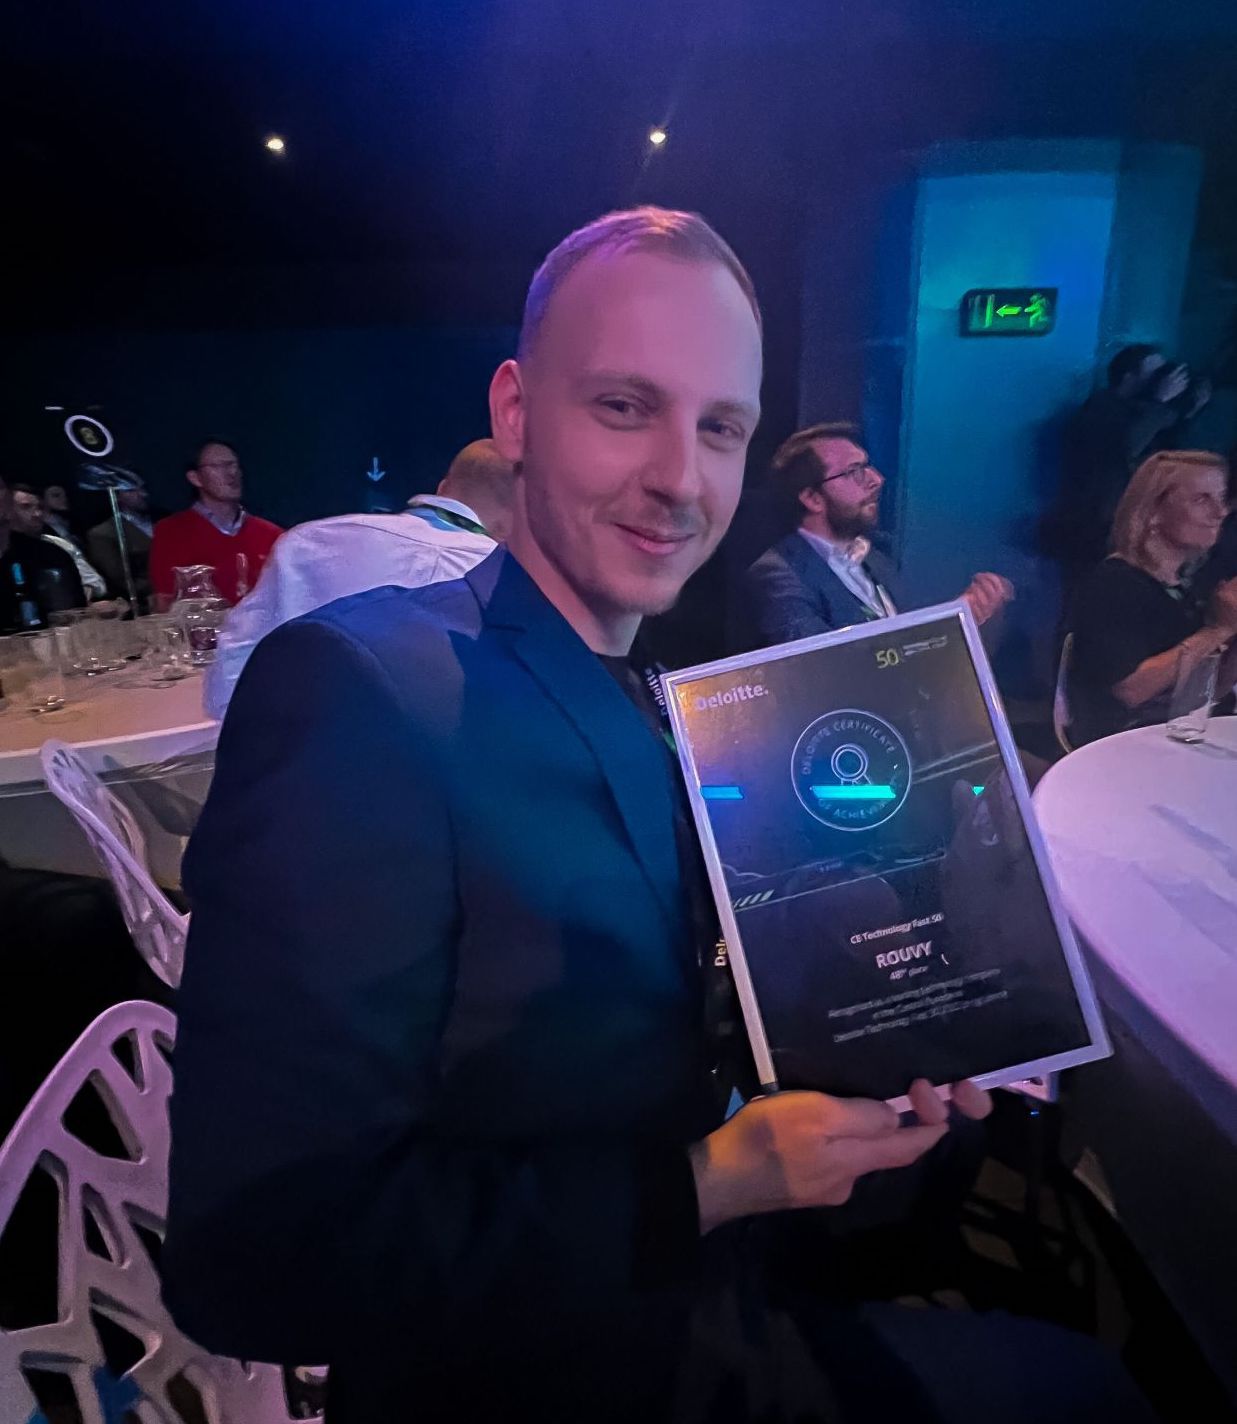 Martin Mrva with his award at the Deloitte Fast 50 CE event